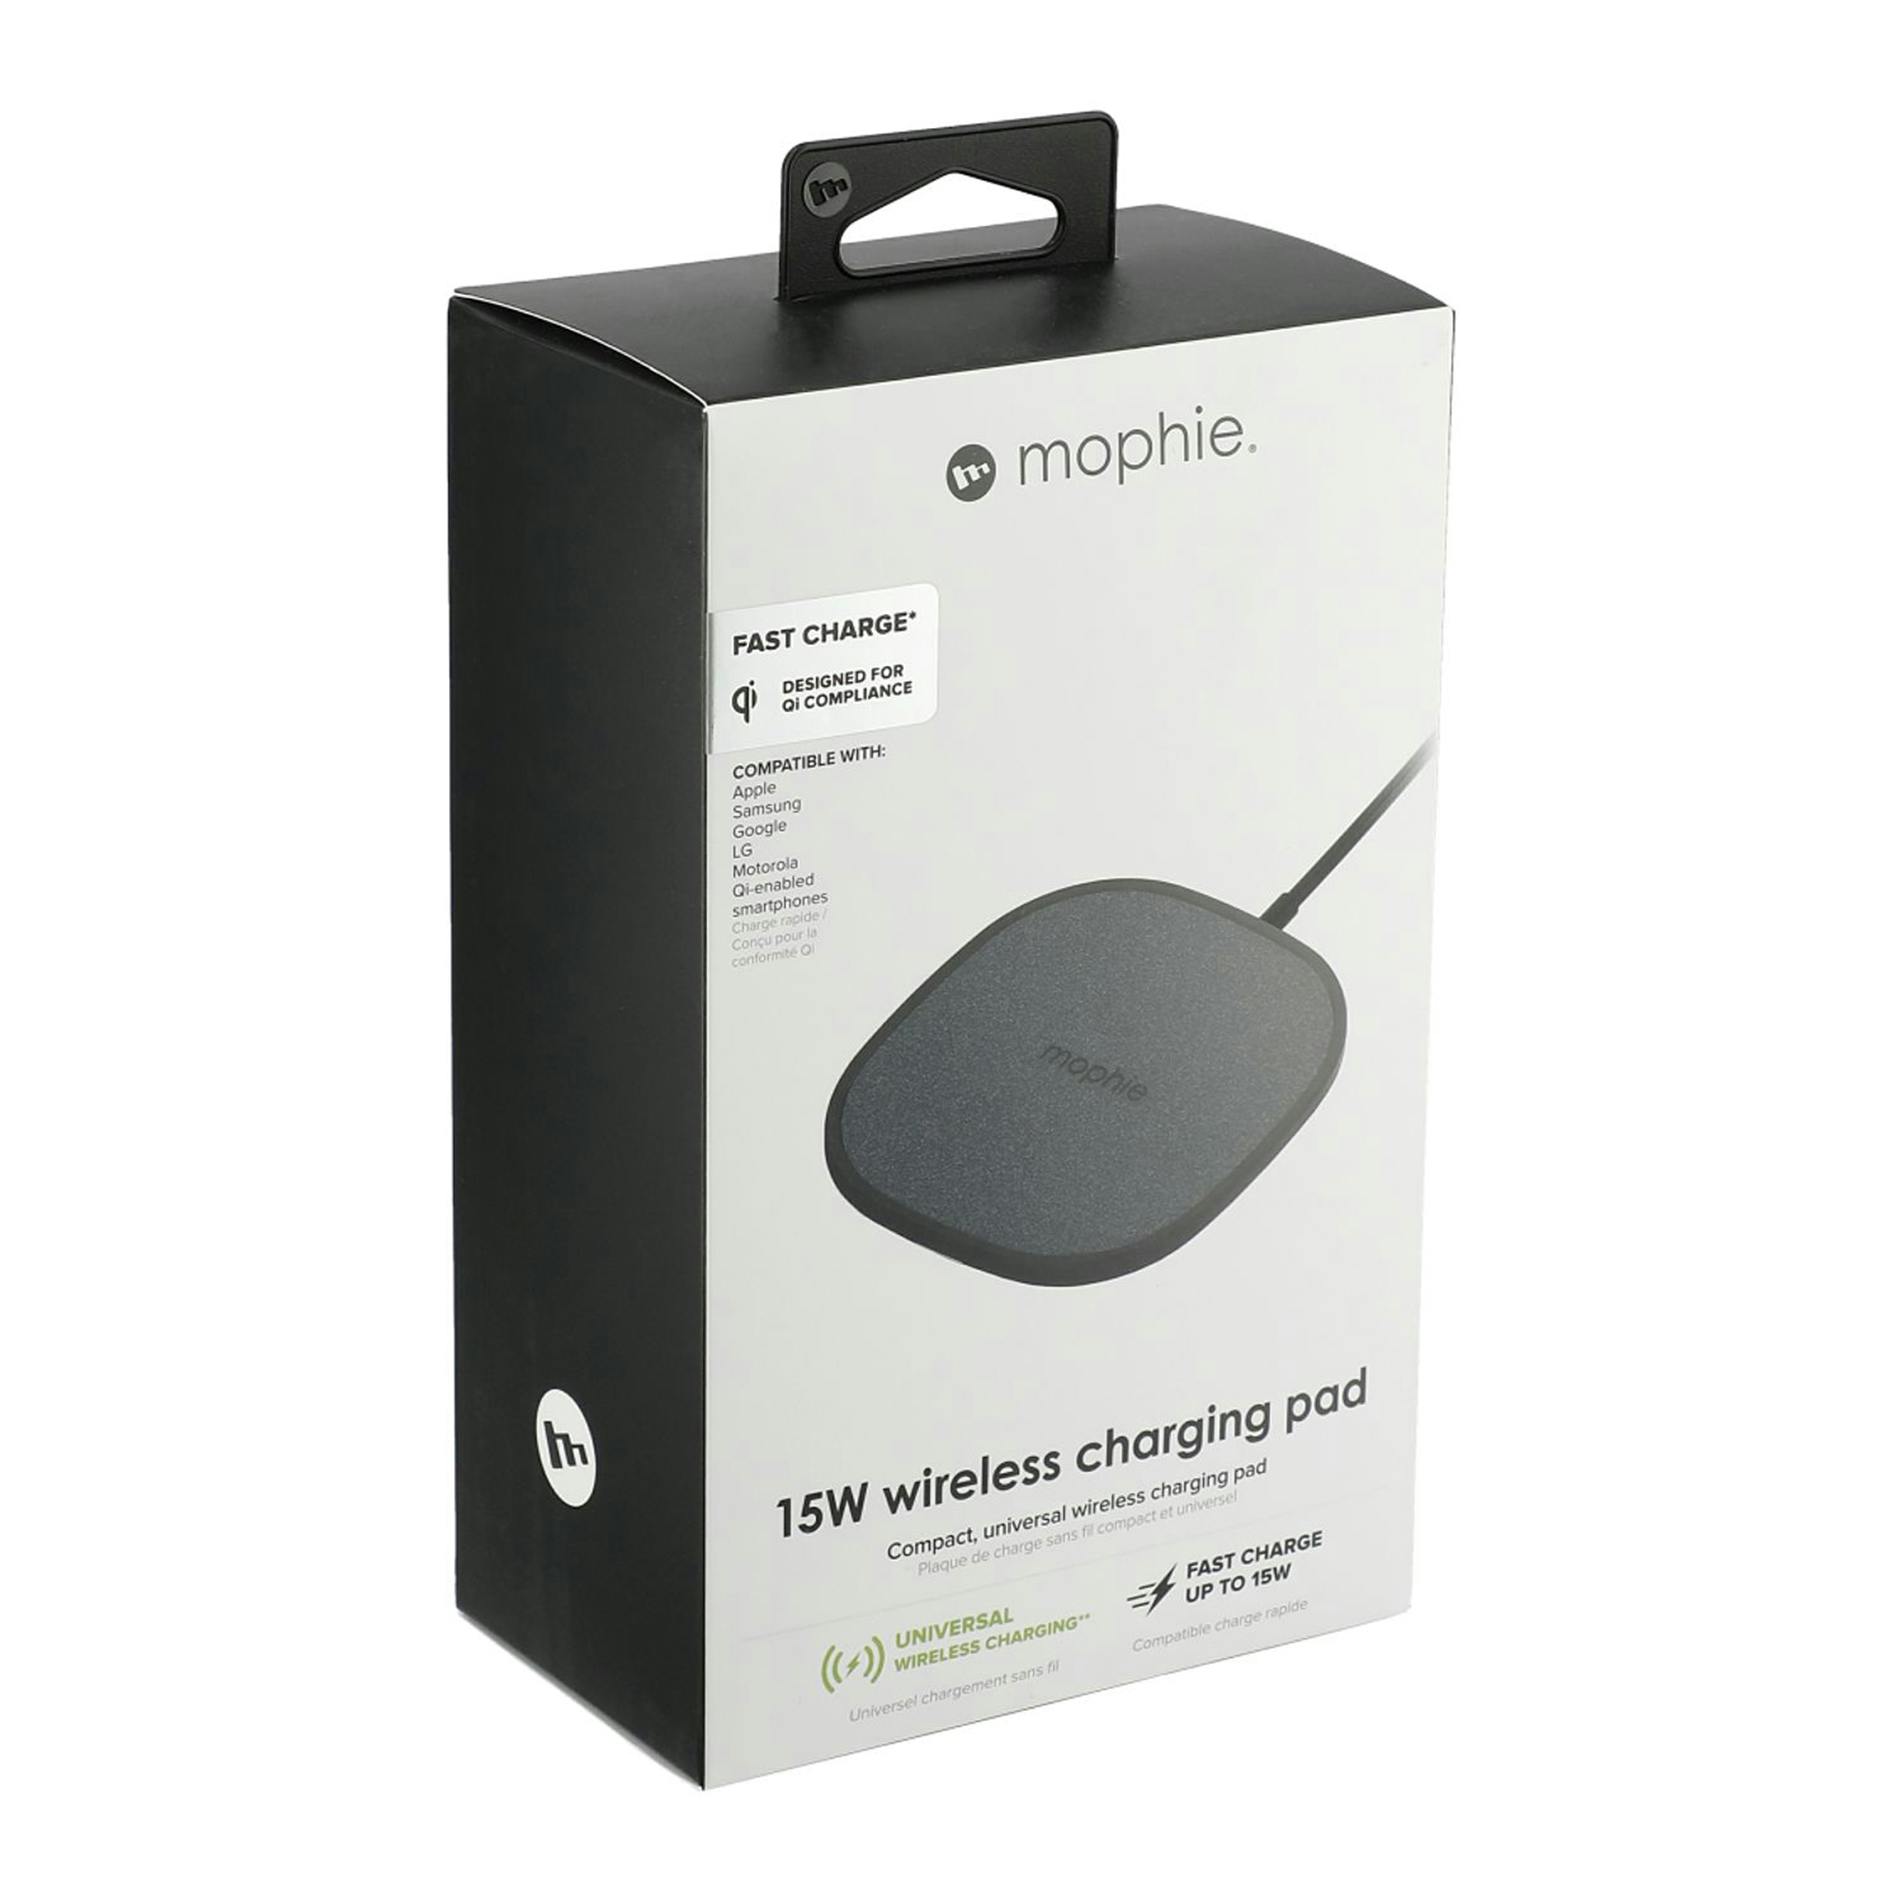 mophie® 15W Wireless Charging Pad - additional Image 1